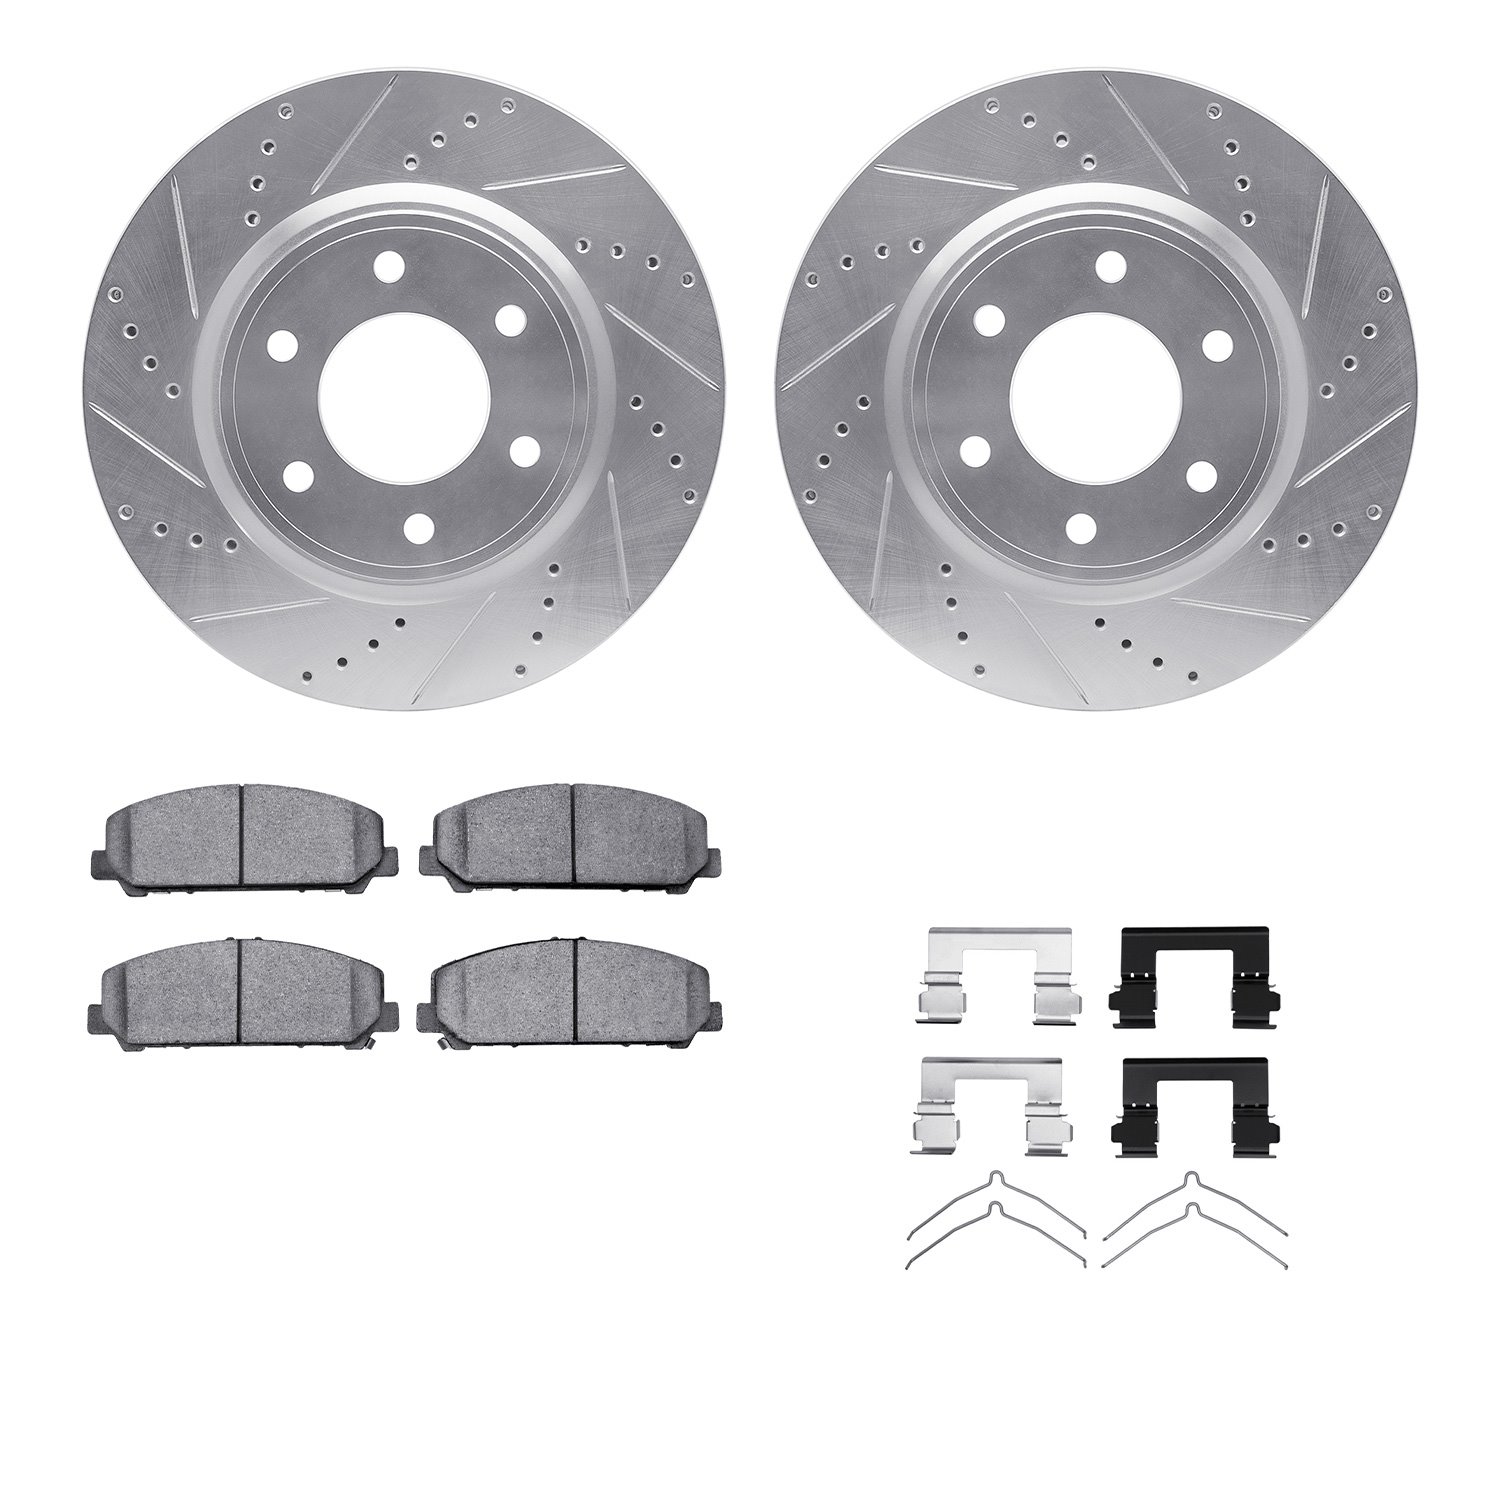 7512-68018 Drilled/Slotted Brake Rotors w/5000 Advanced Brake Pads Kit & Hardware [Silver], Fits Select Infiniti/Nissan, Positio